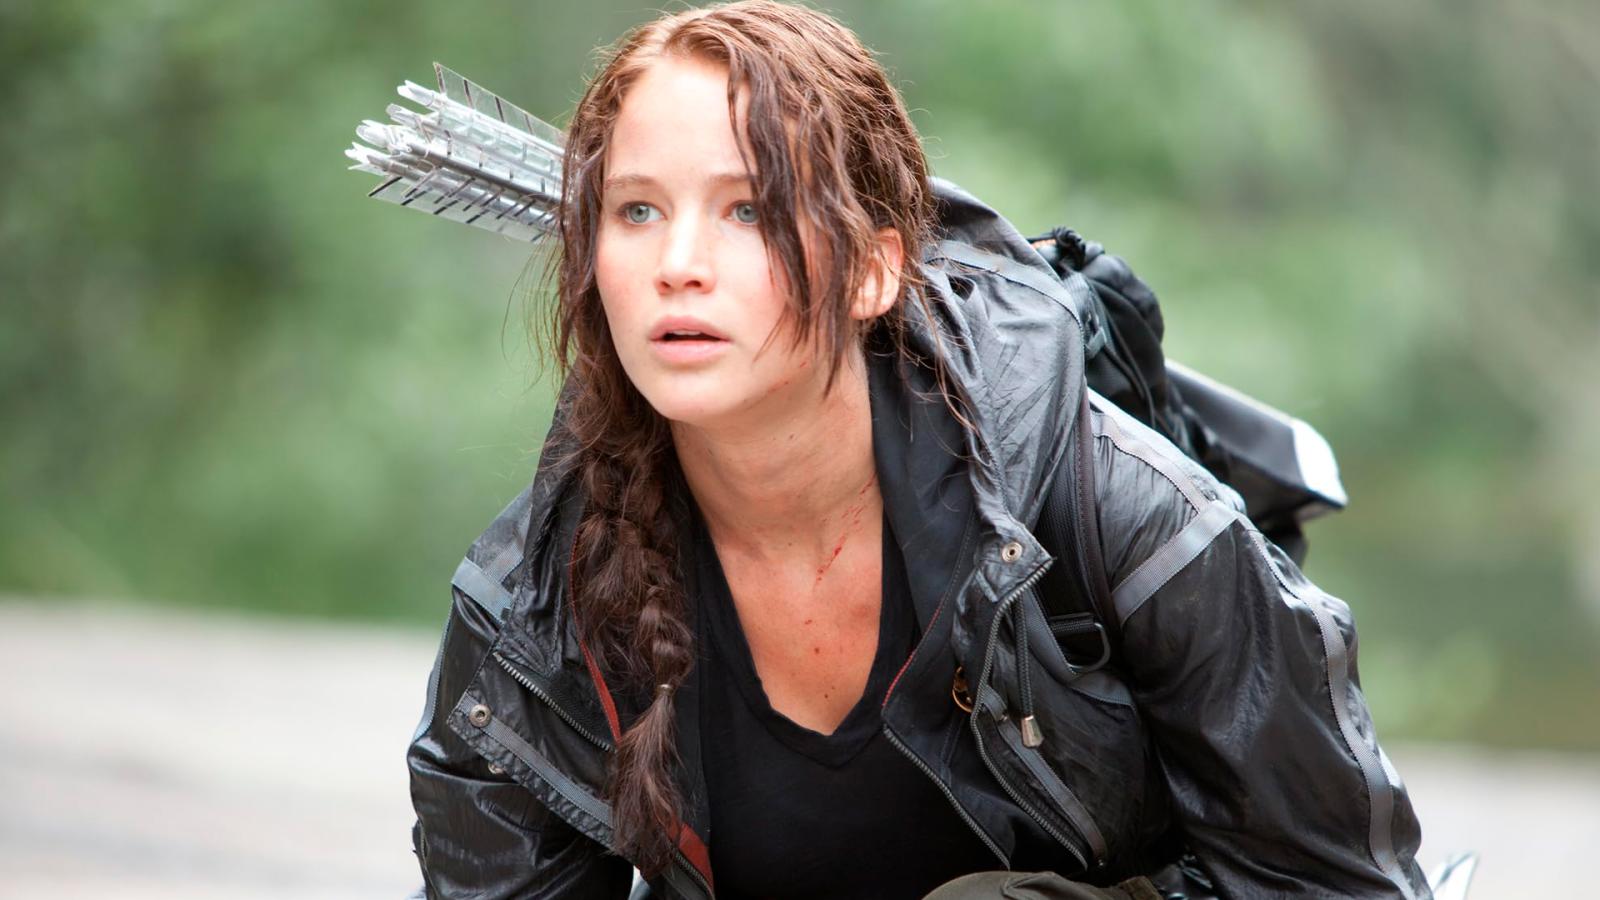 Jennifer Lawrence Might Return as Katniss Everdeen Despite Hunger Games Movies Being Over - image 3